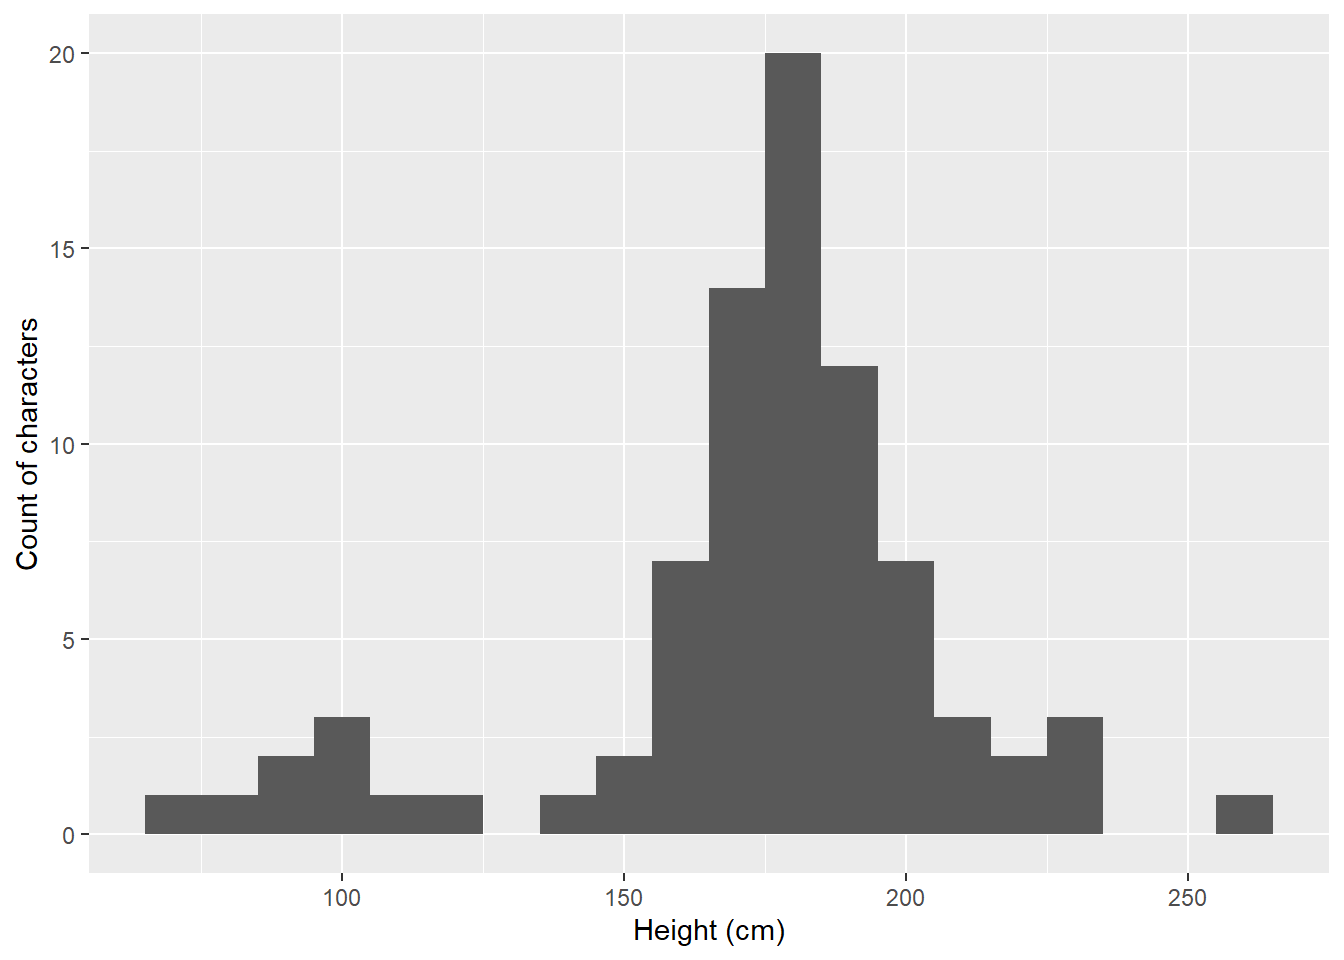 Histogram of height (cm) of Star Wars characters